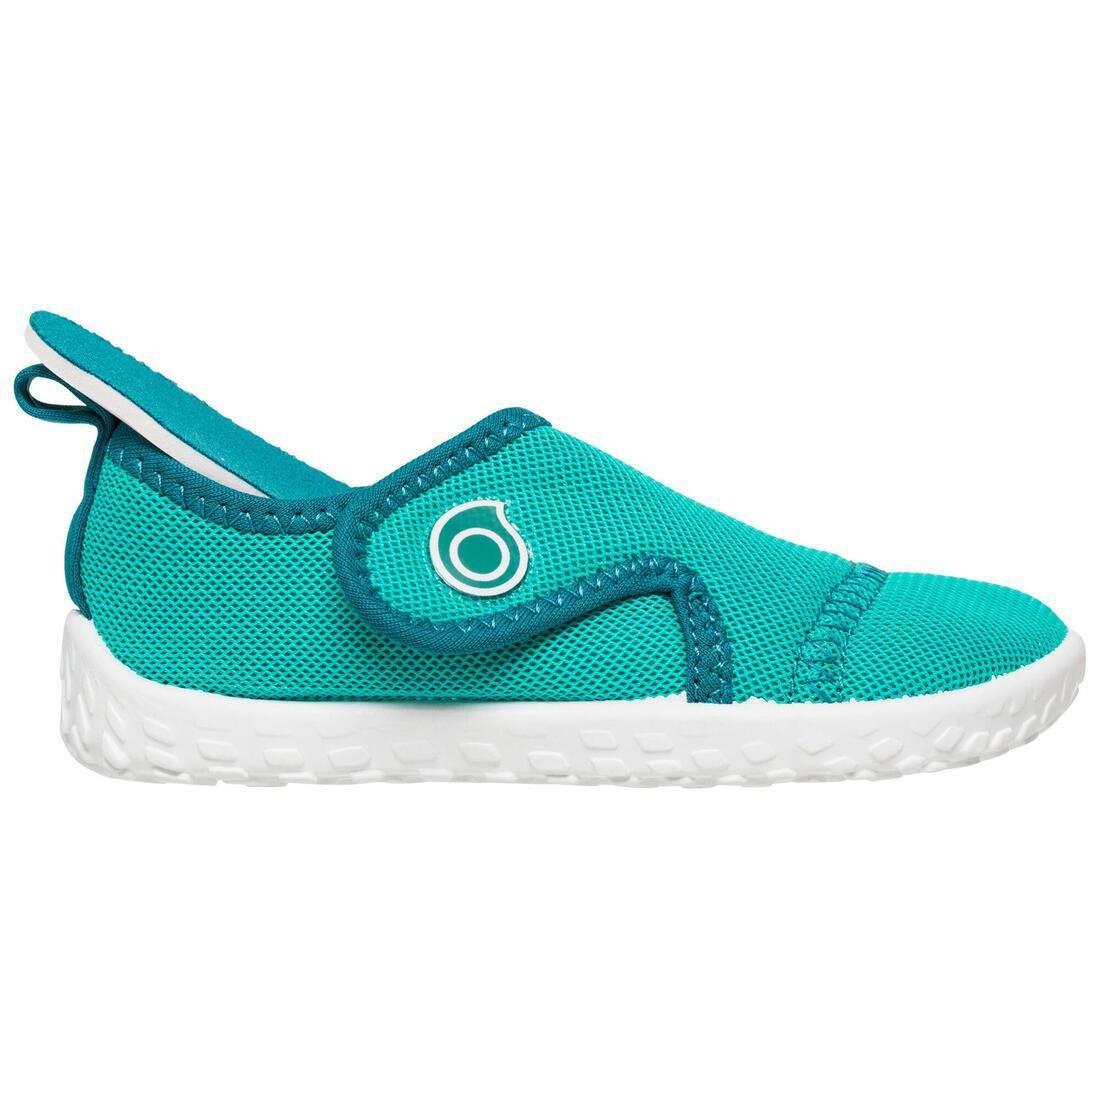 SUBEA - Baby'S Shoes For Water Aquashoes 100, Dark Peacock Blue